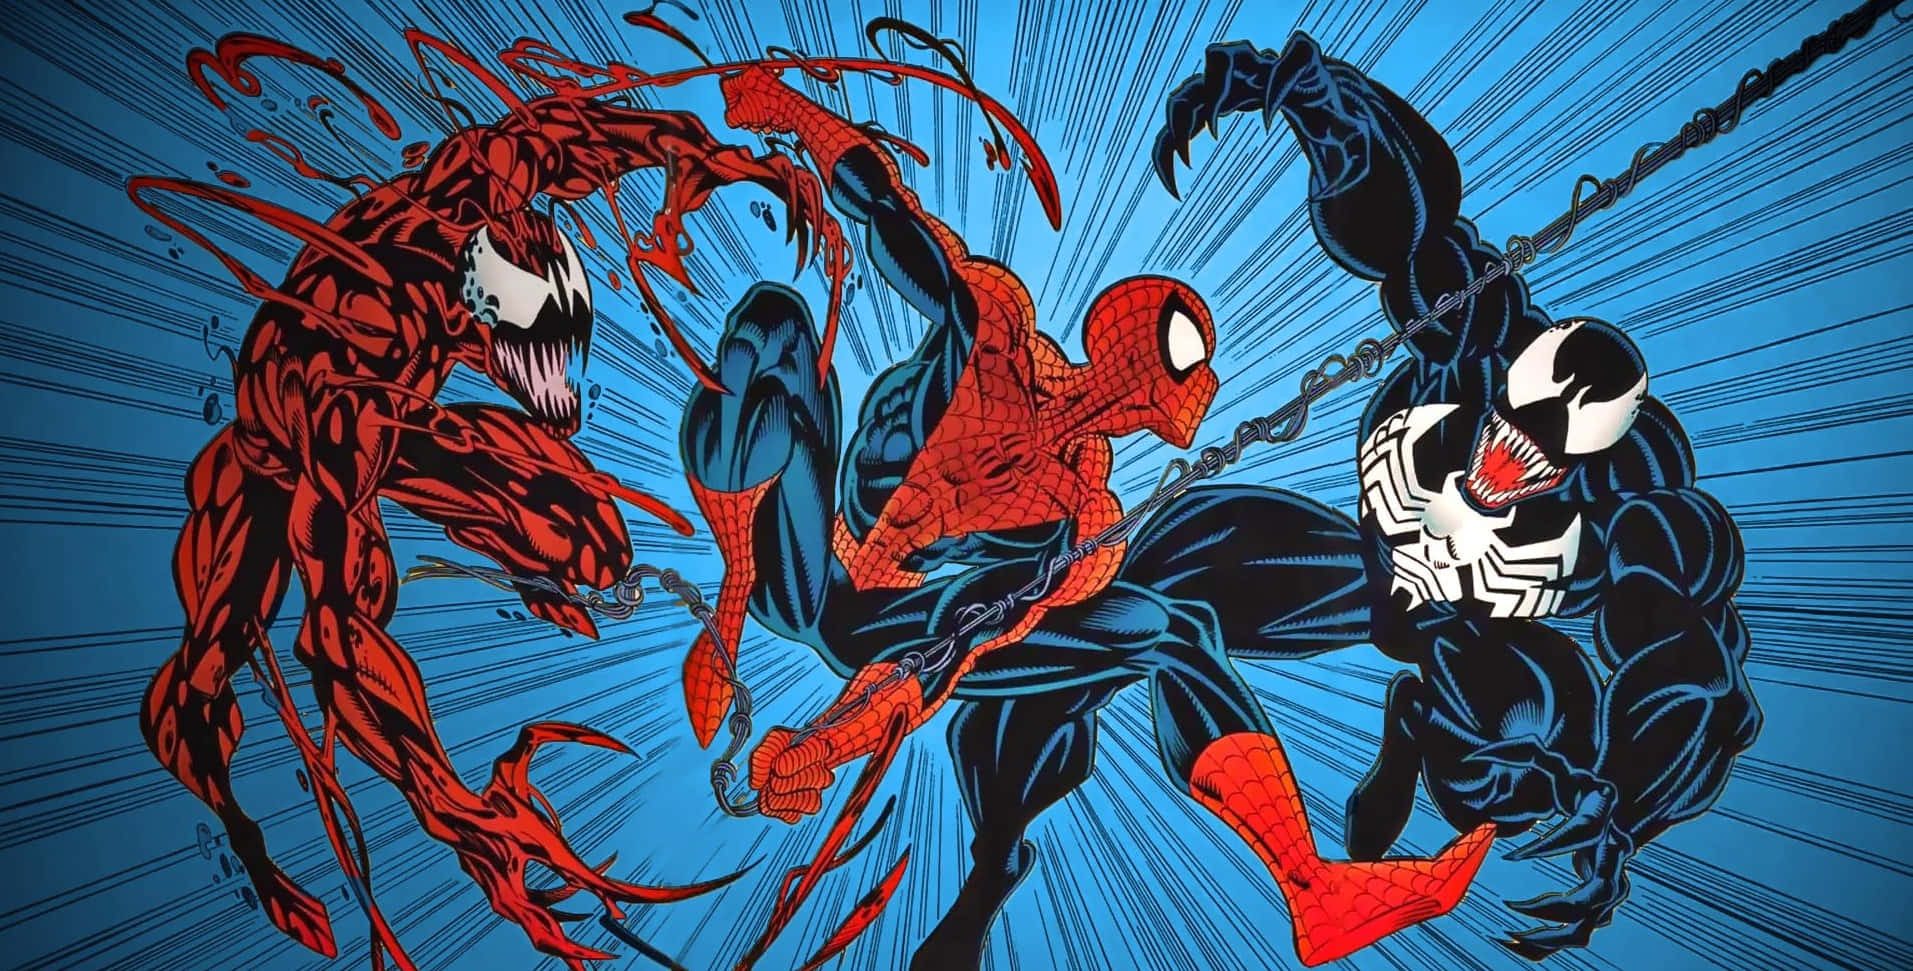 Carnage Wreaks Havoc in Action Packed Artwork